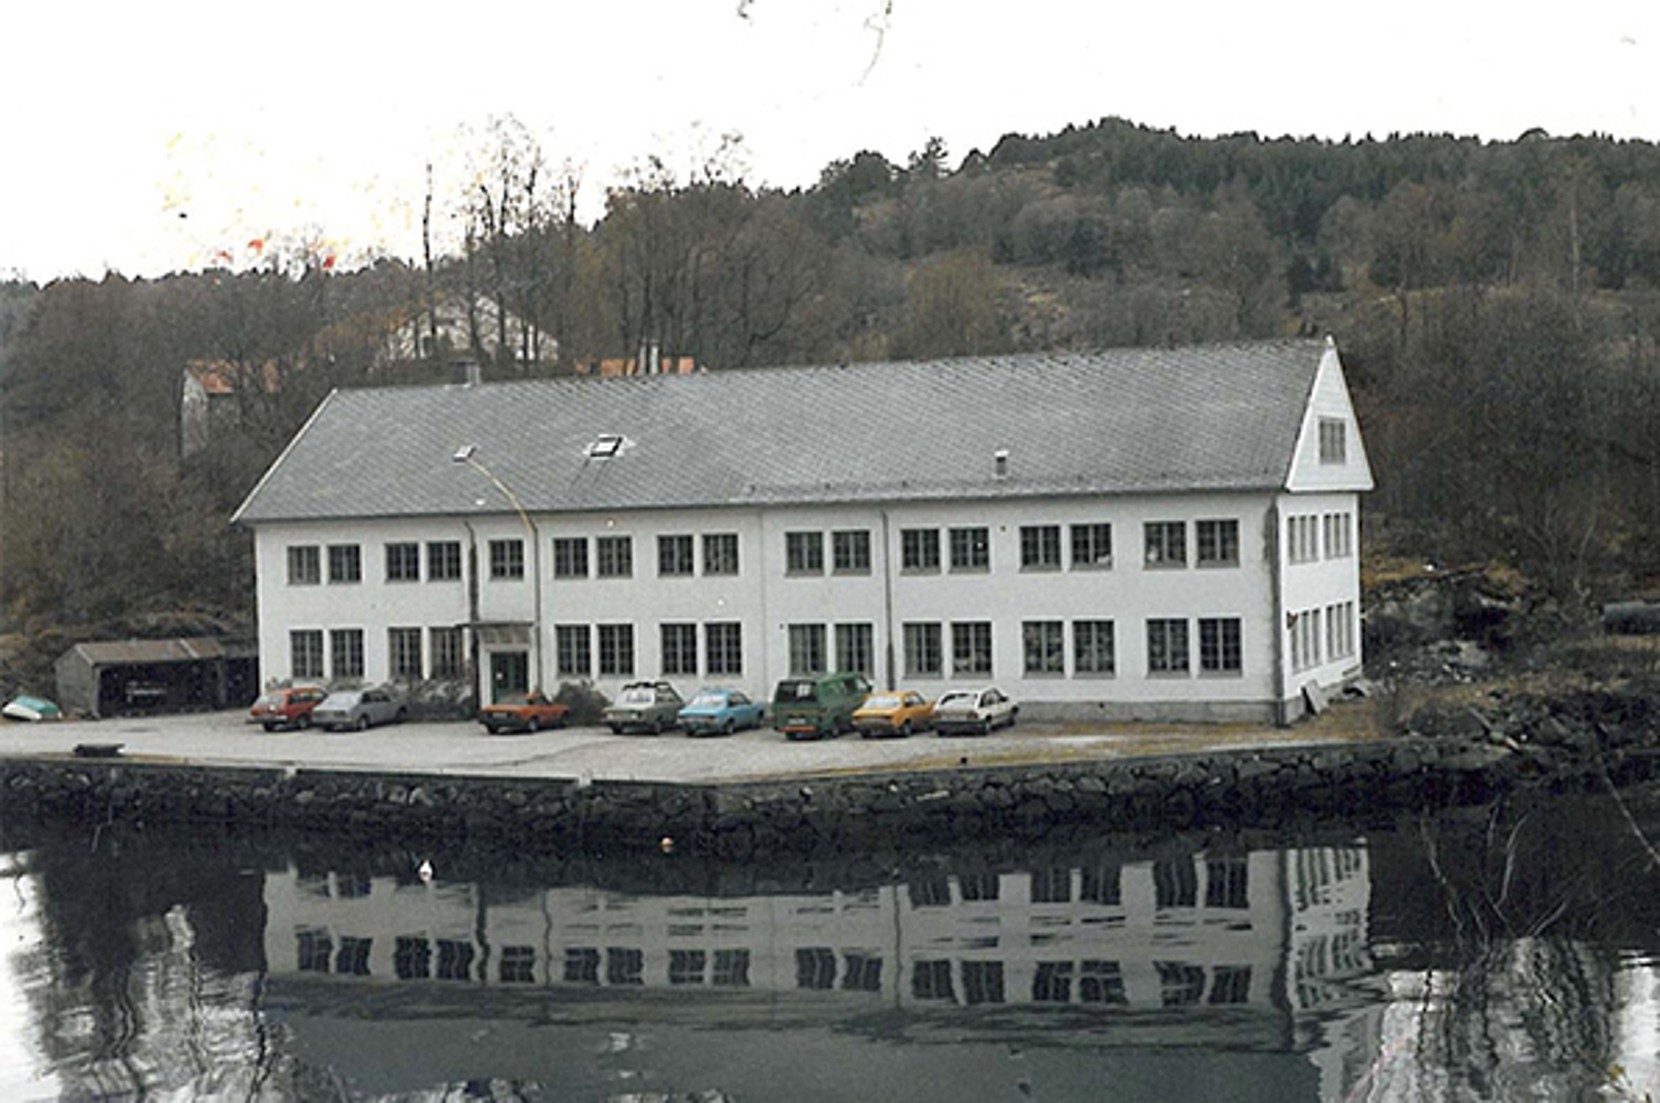 The Norlender factory in Hosanger, Norway where the L.L.Bean Norwegian Sweater is knit